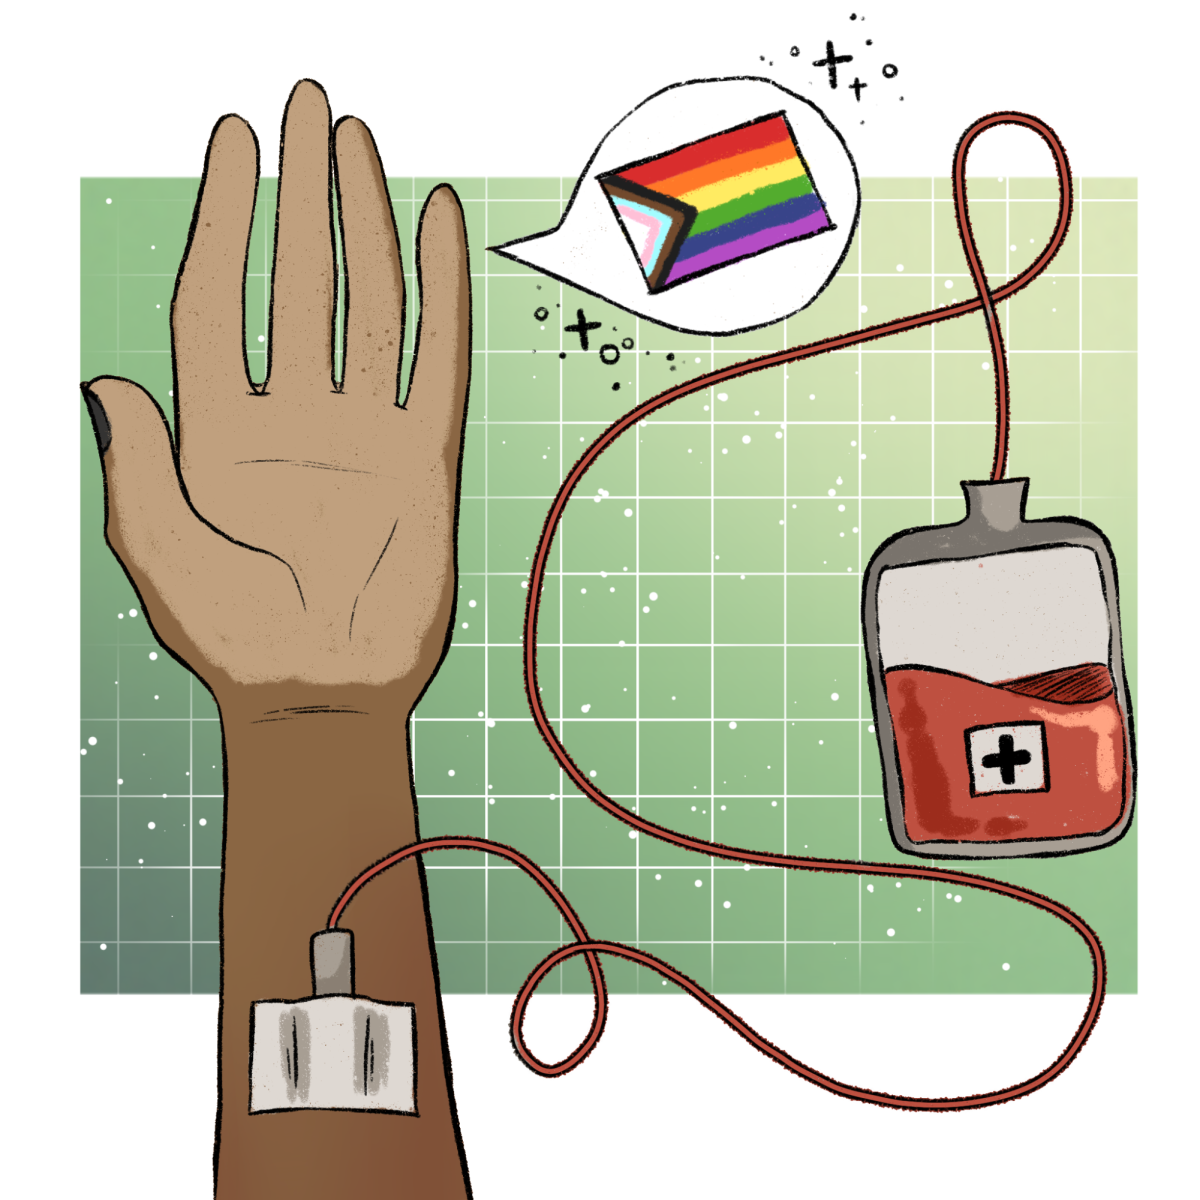 Austin+blood+donation+center+We+Are+Blood+expands+eligibility+guidelines+to+include+more+LGBTQ%2B+donors